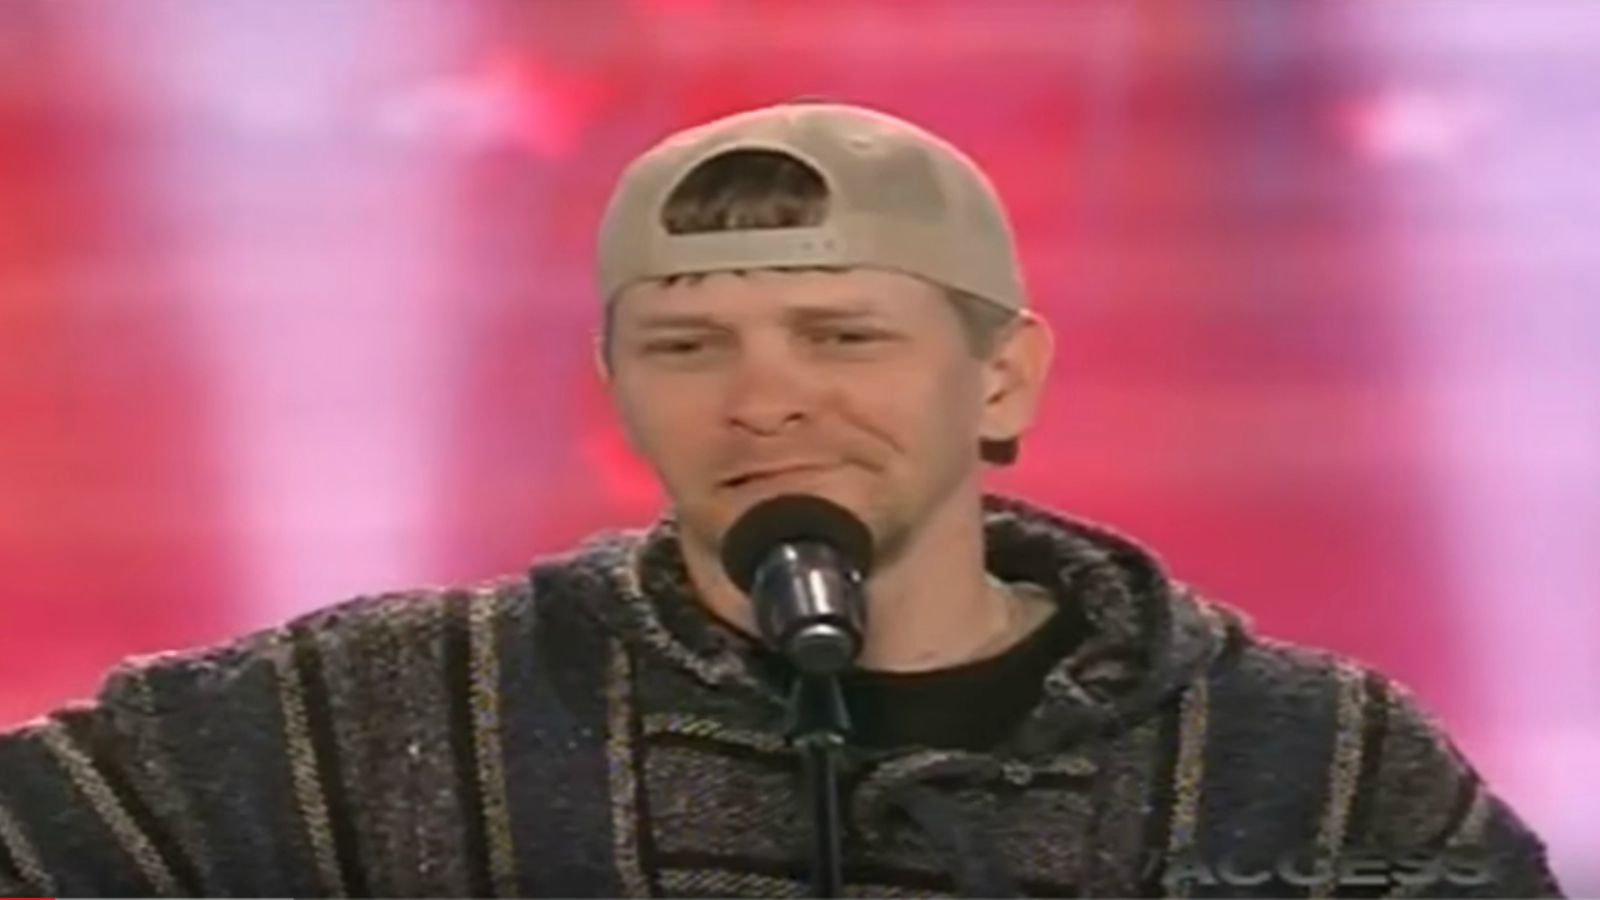 When This ‘Hillbilly’ Walked on Stage, the Judges Laughed. Seconds Later, Their Jaws Dropped.